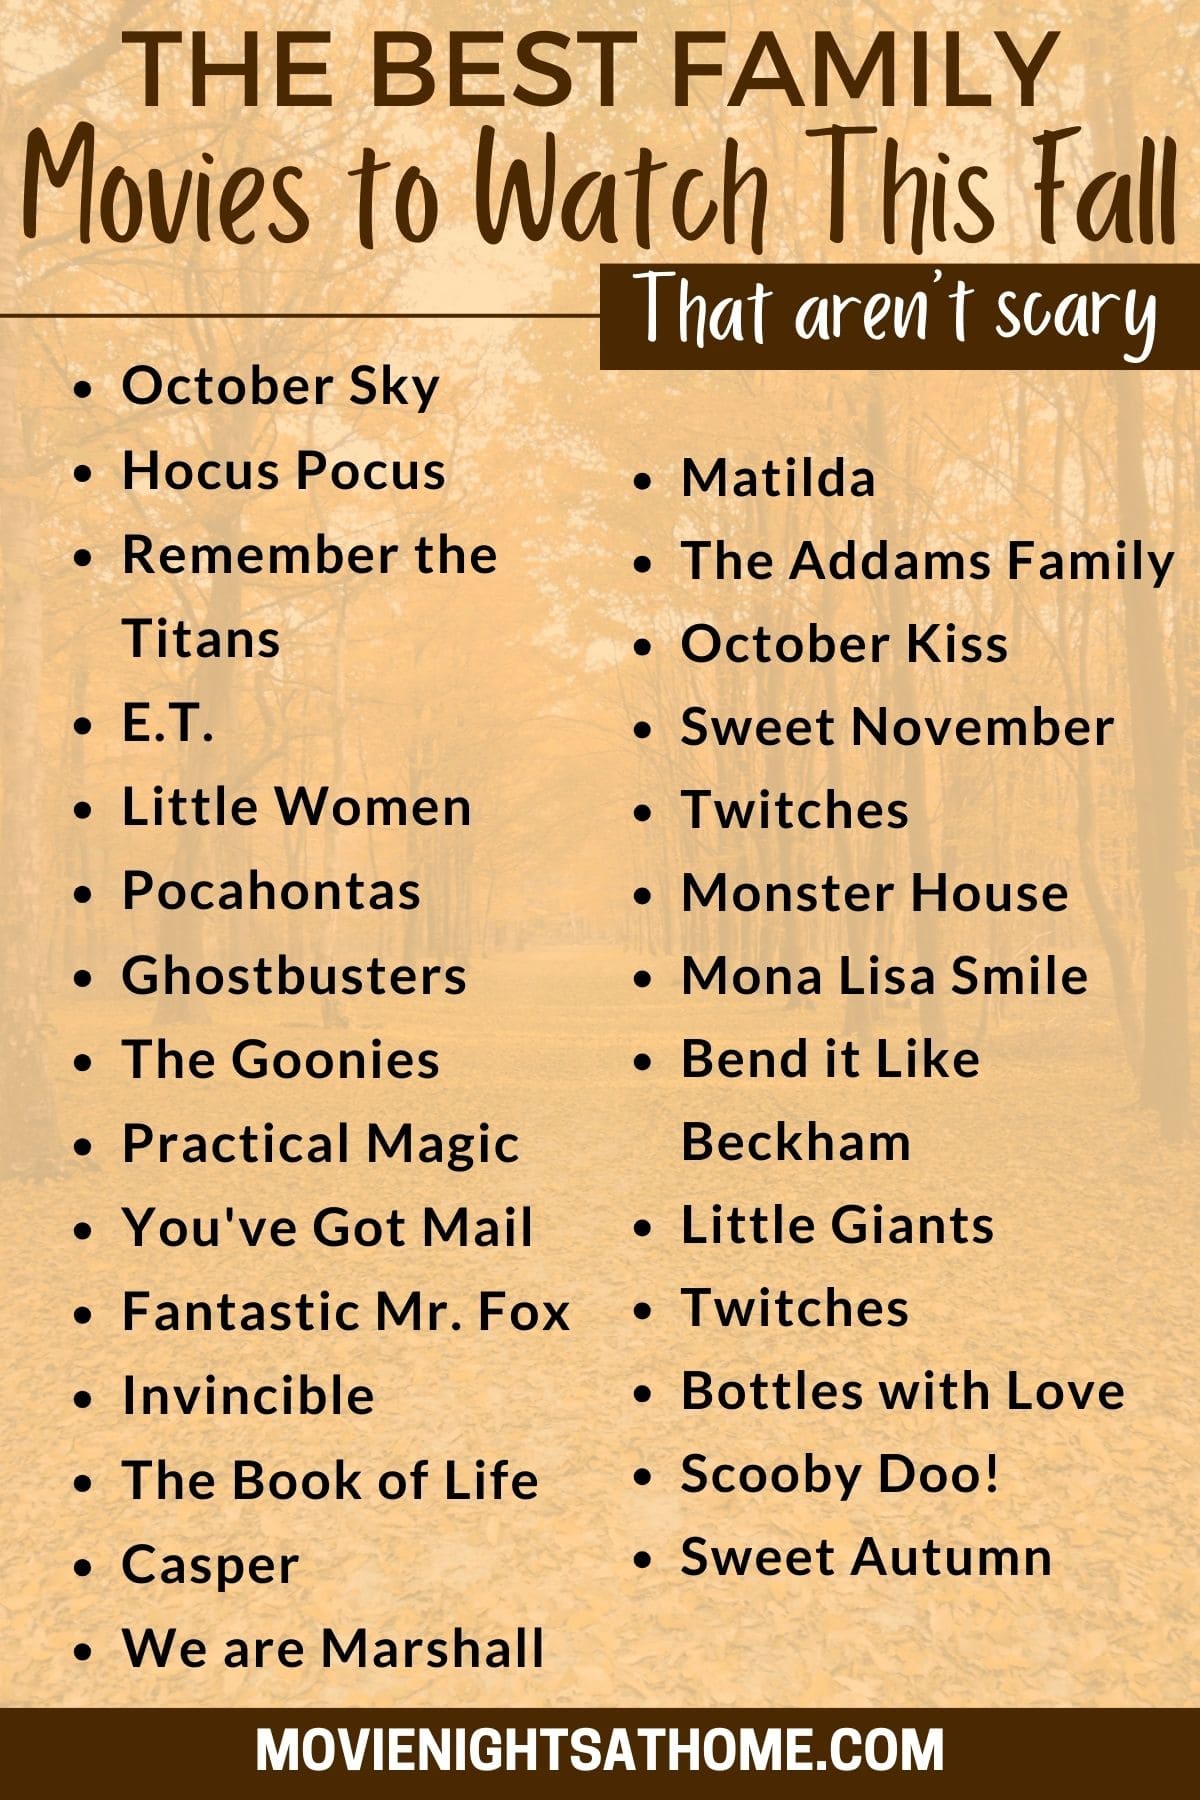 list of the 50 Family Movies to Watch in October